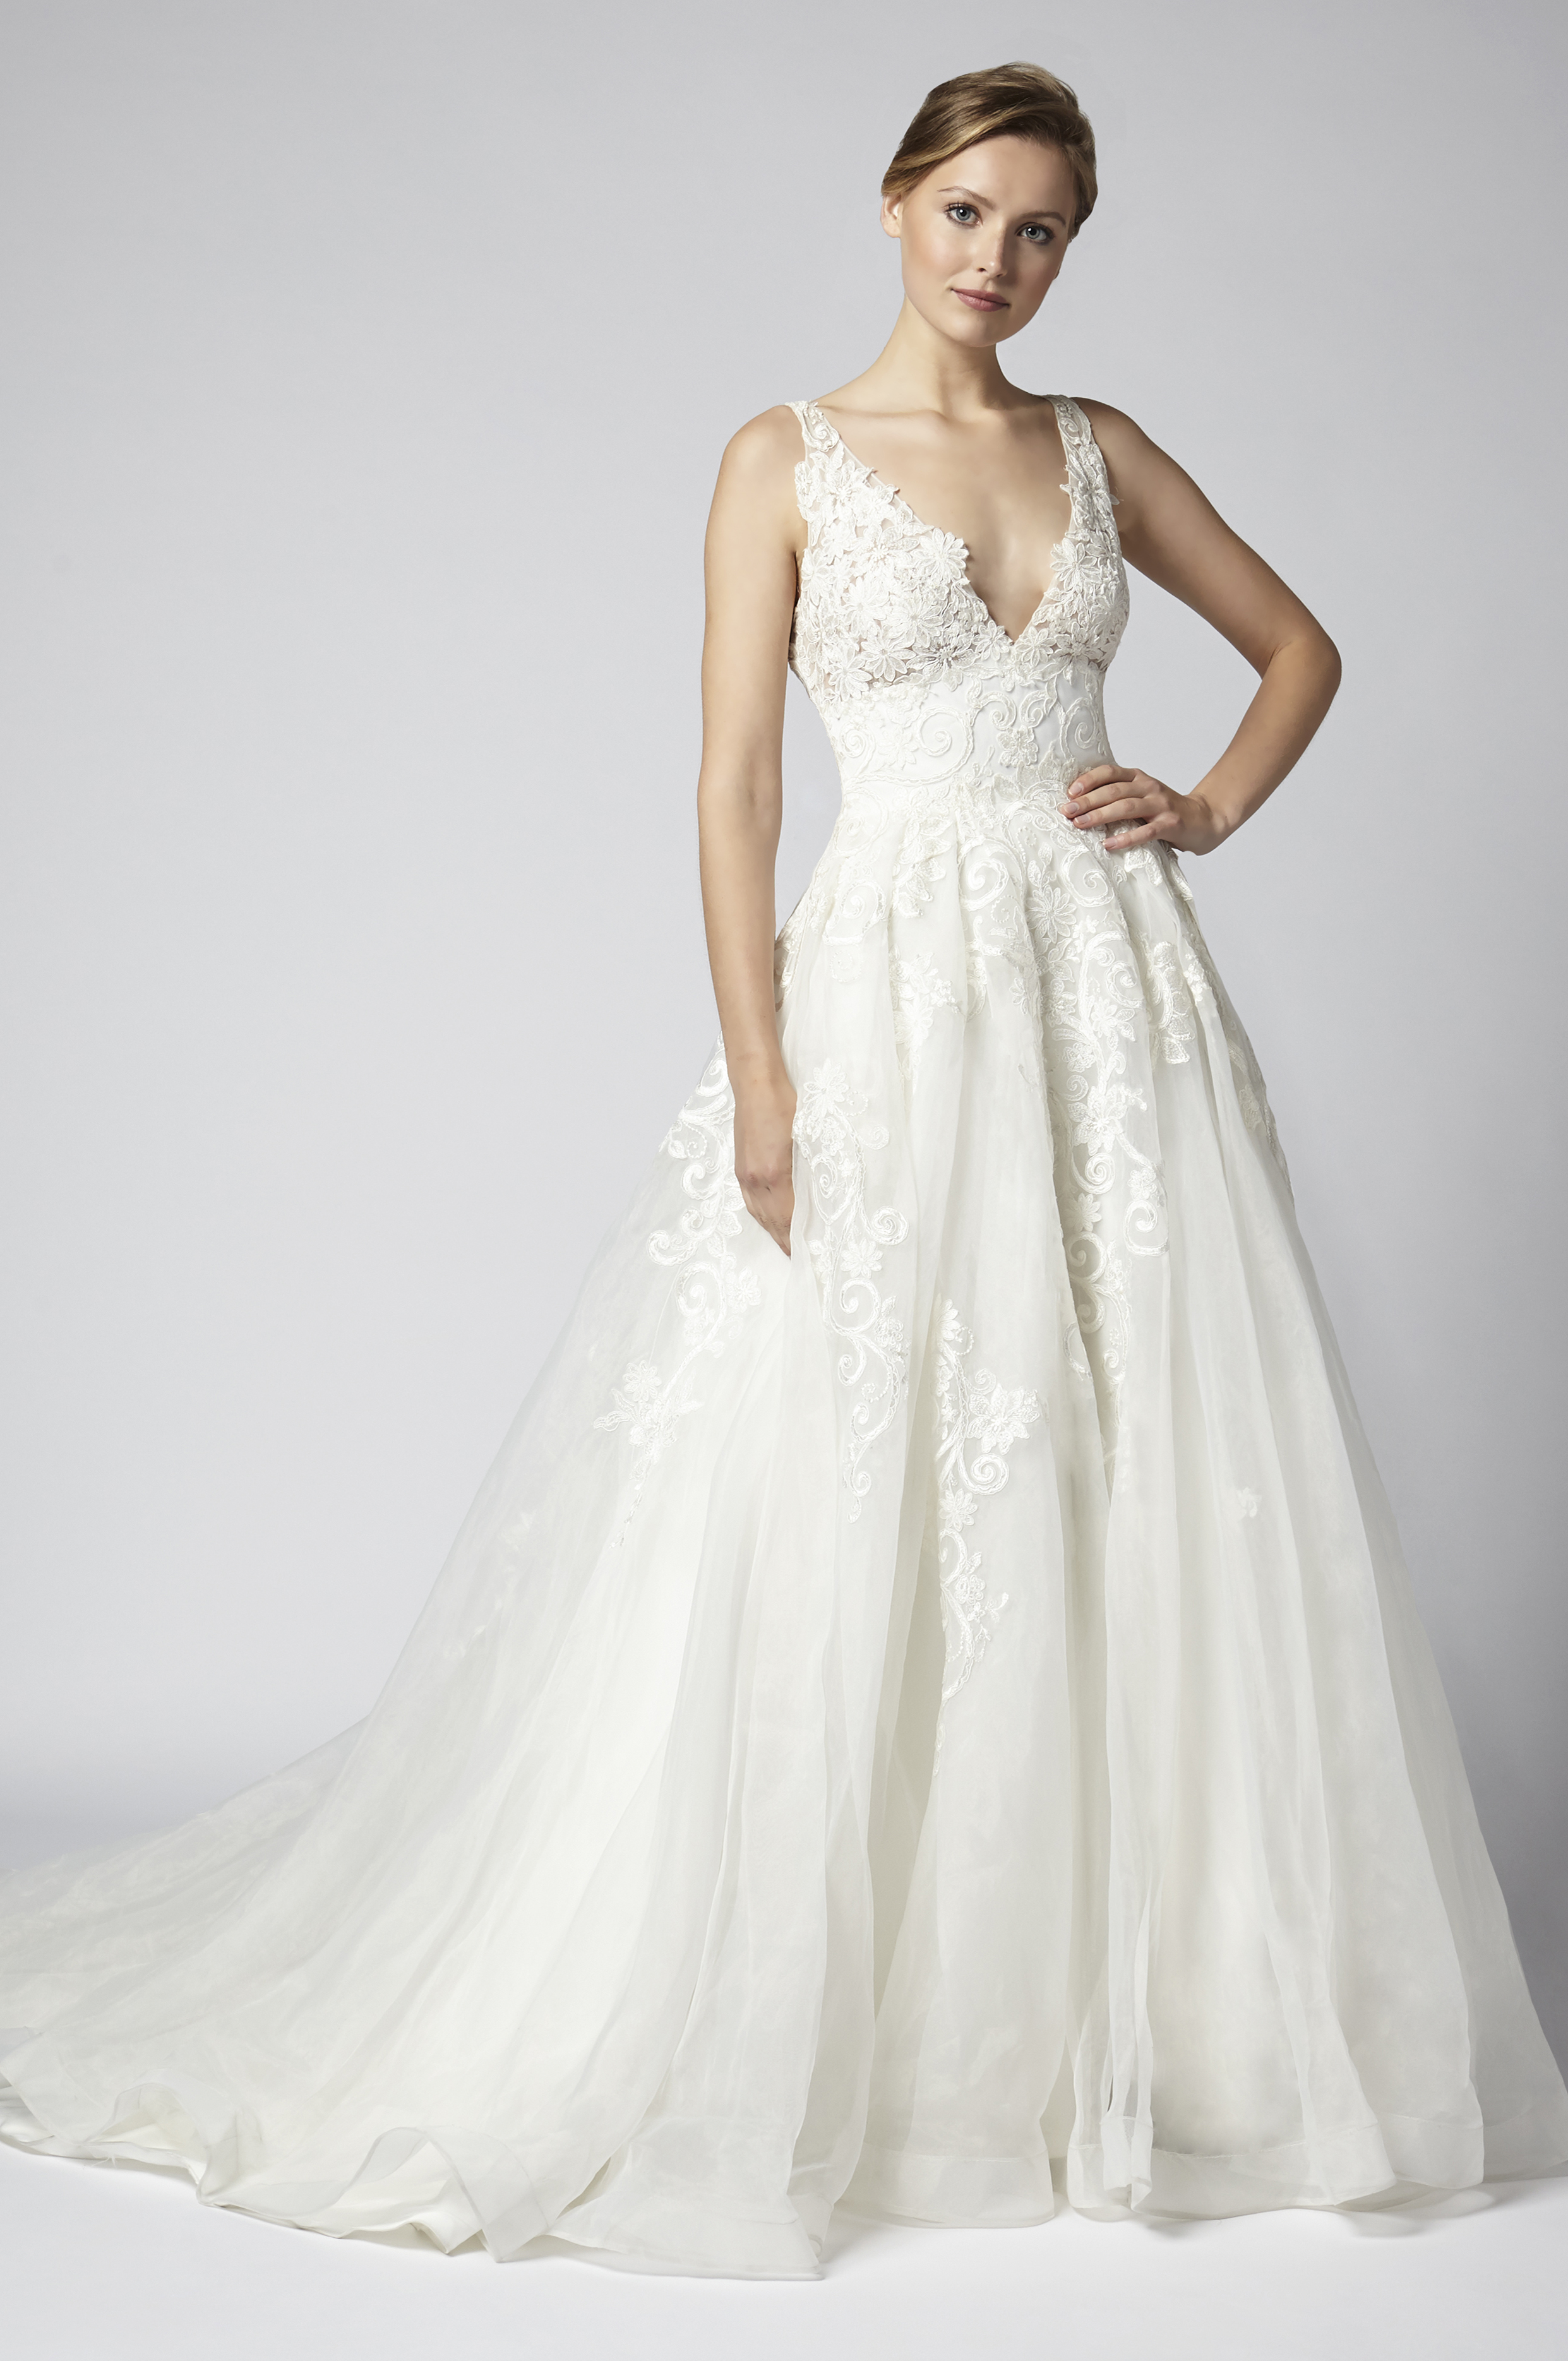 henry-roth-sleeveless-lace-v-neck-ball-gown-wedding-dress-with-corset-bodice-33755414